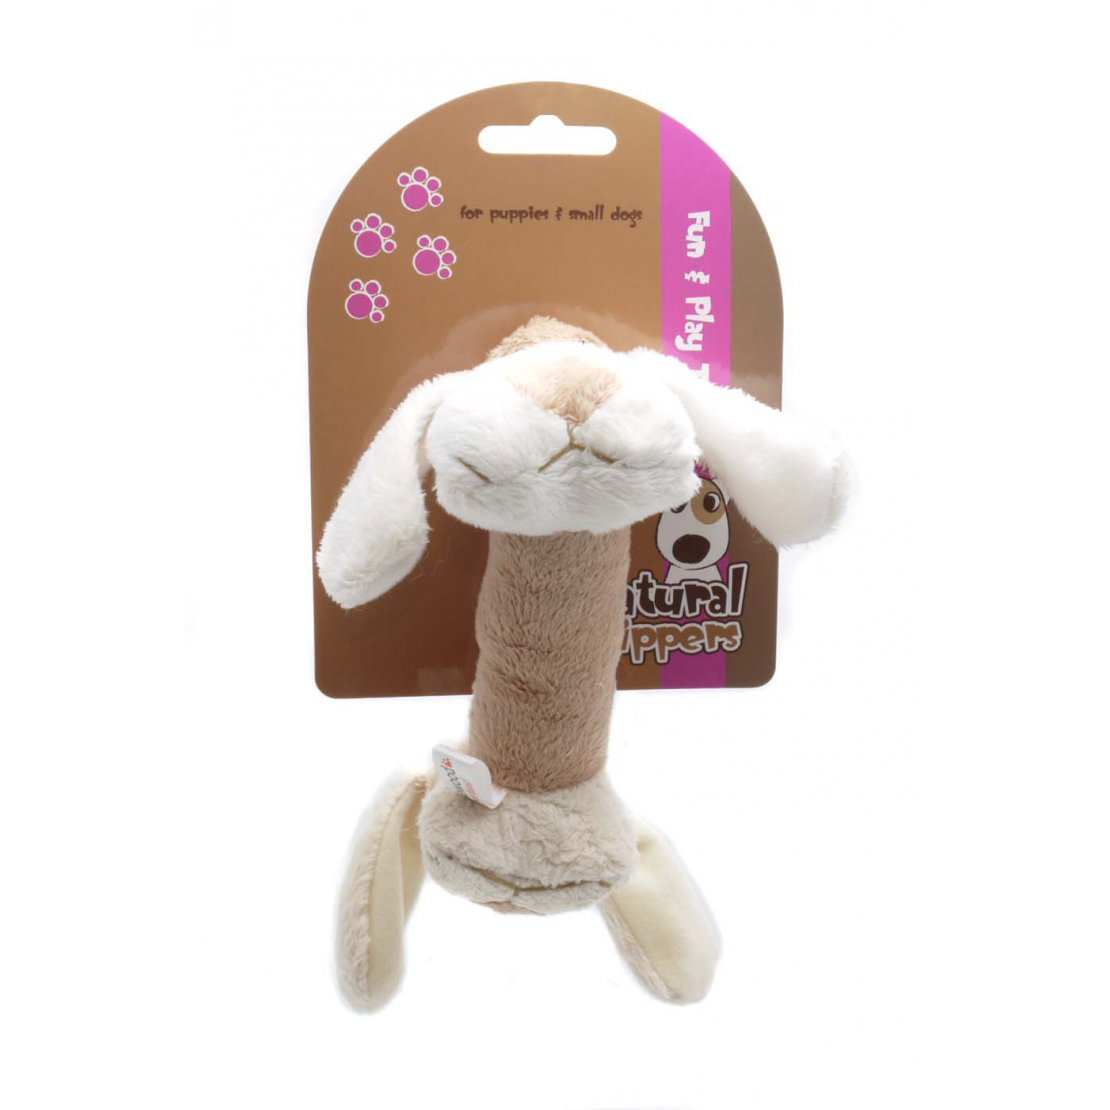 Natural Nippers Cuddle Plush Dog Toy - Pica's Pets